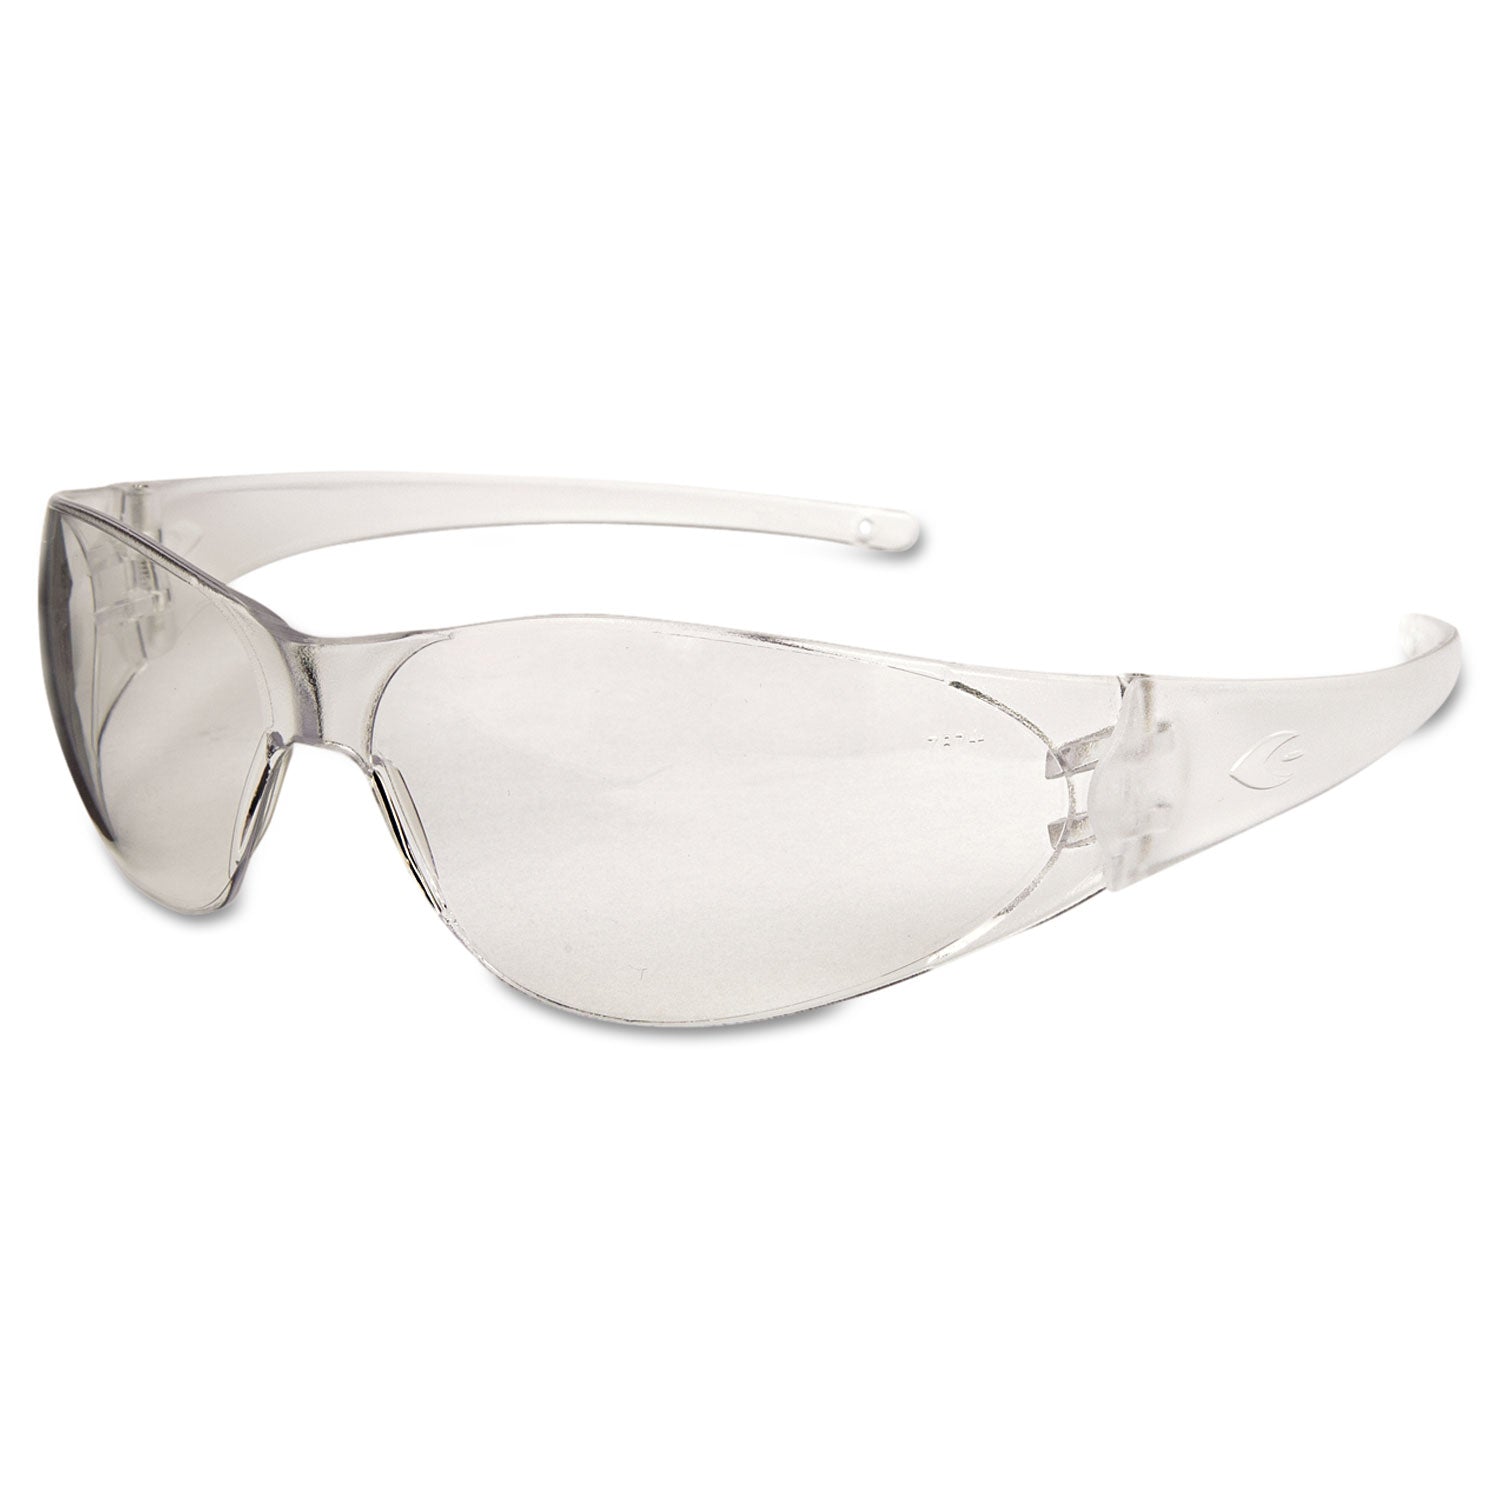 checkmate-safety-glasses-clear-temple-clear-lens-anti-fog_crwck110af - 1